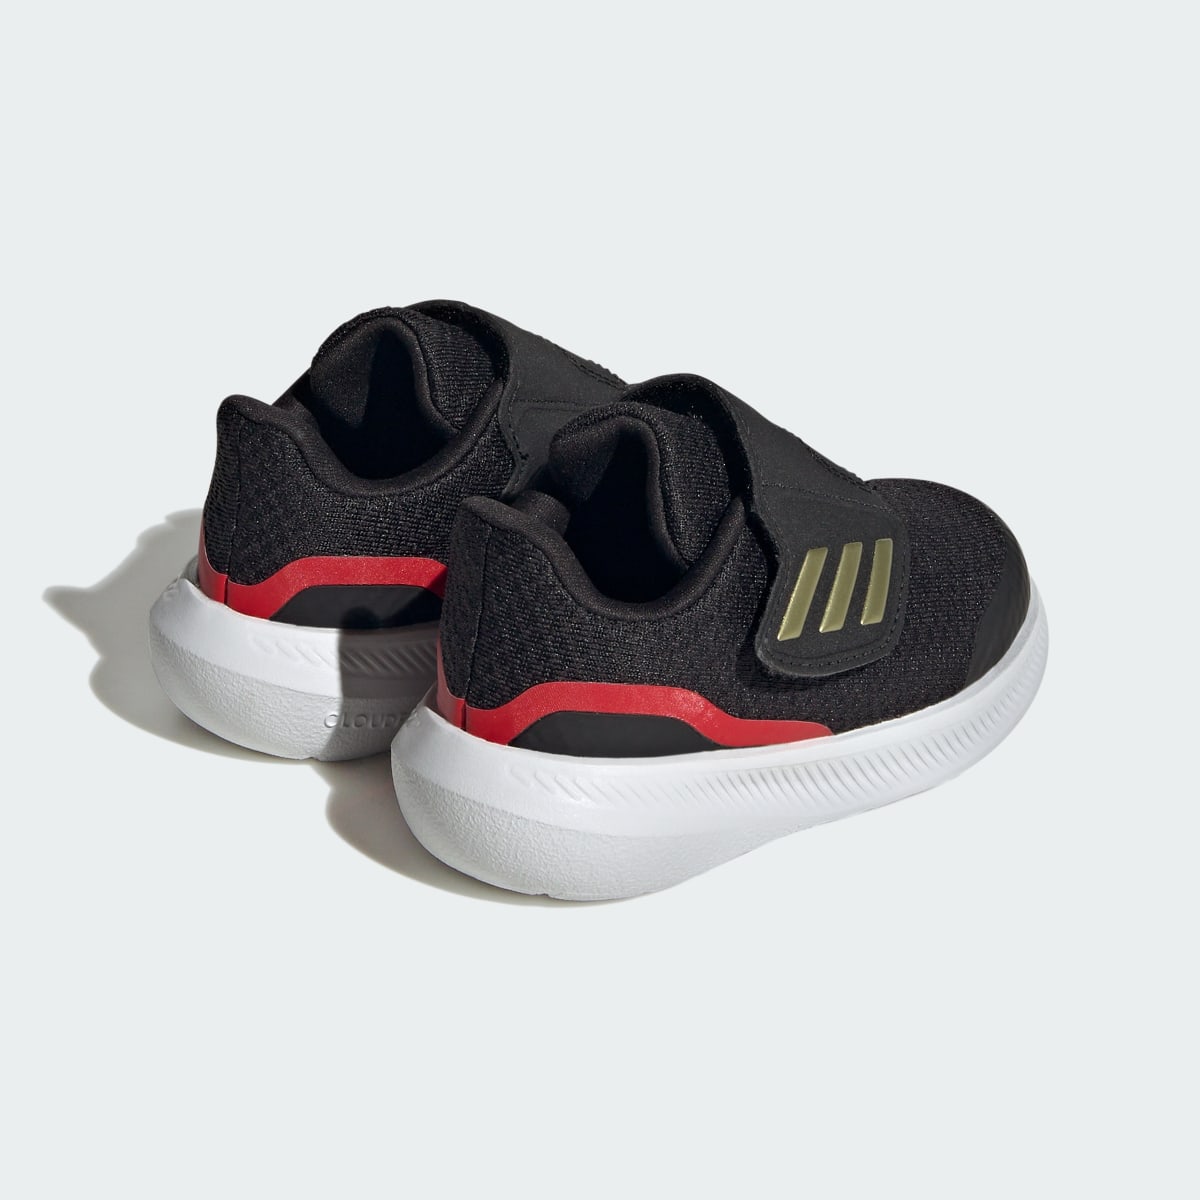 Adidas Runfalcon 3.0 Sport Running Hook-and-Loop Shoes. 6